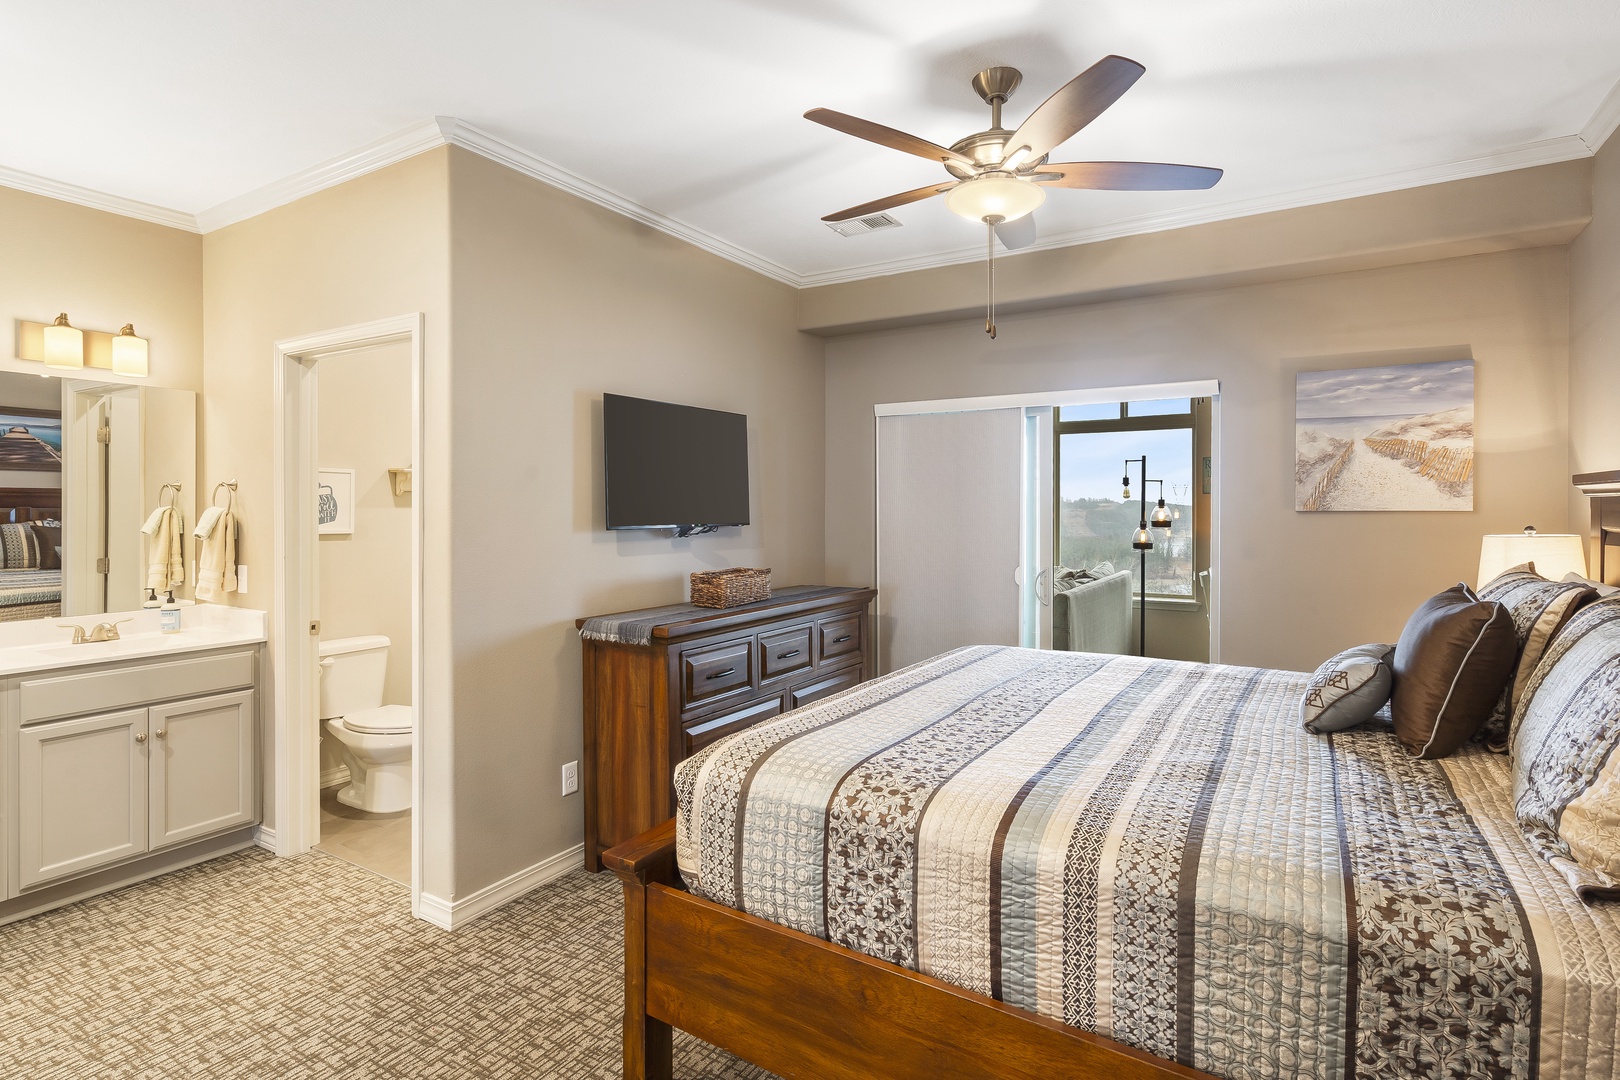 The third king suite boasts a private ensuite, Smart TV, & back room access